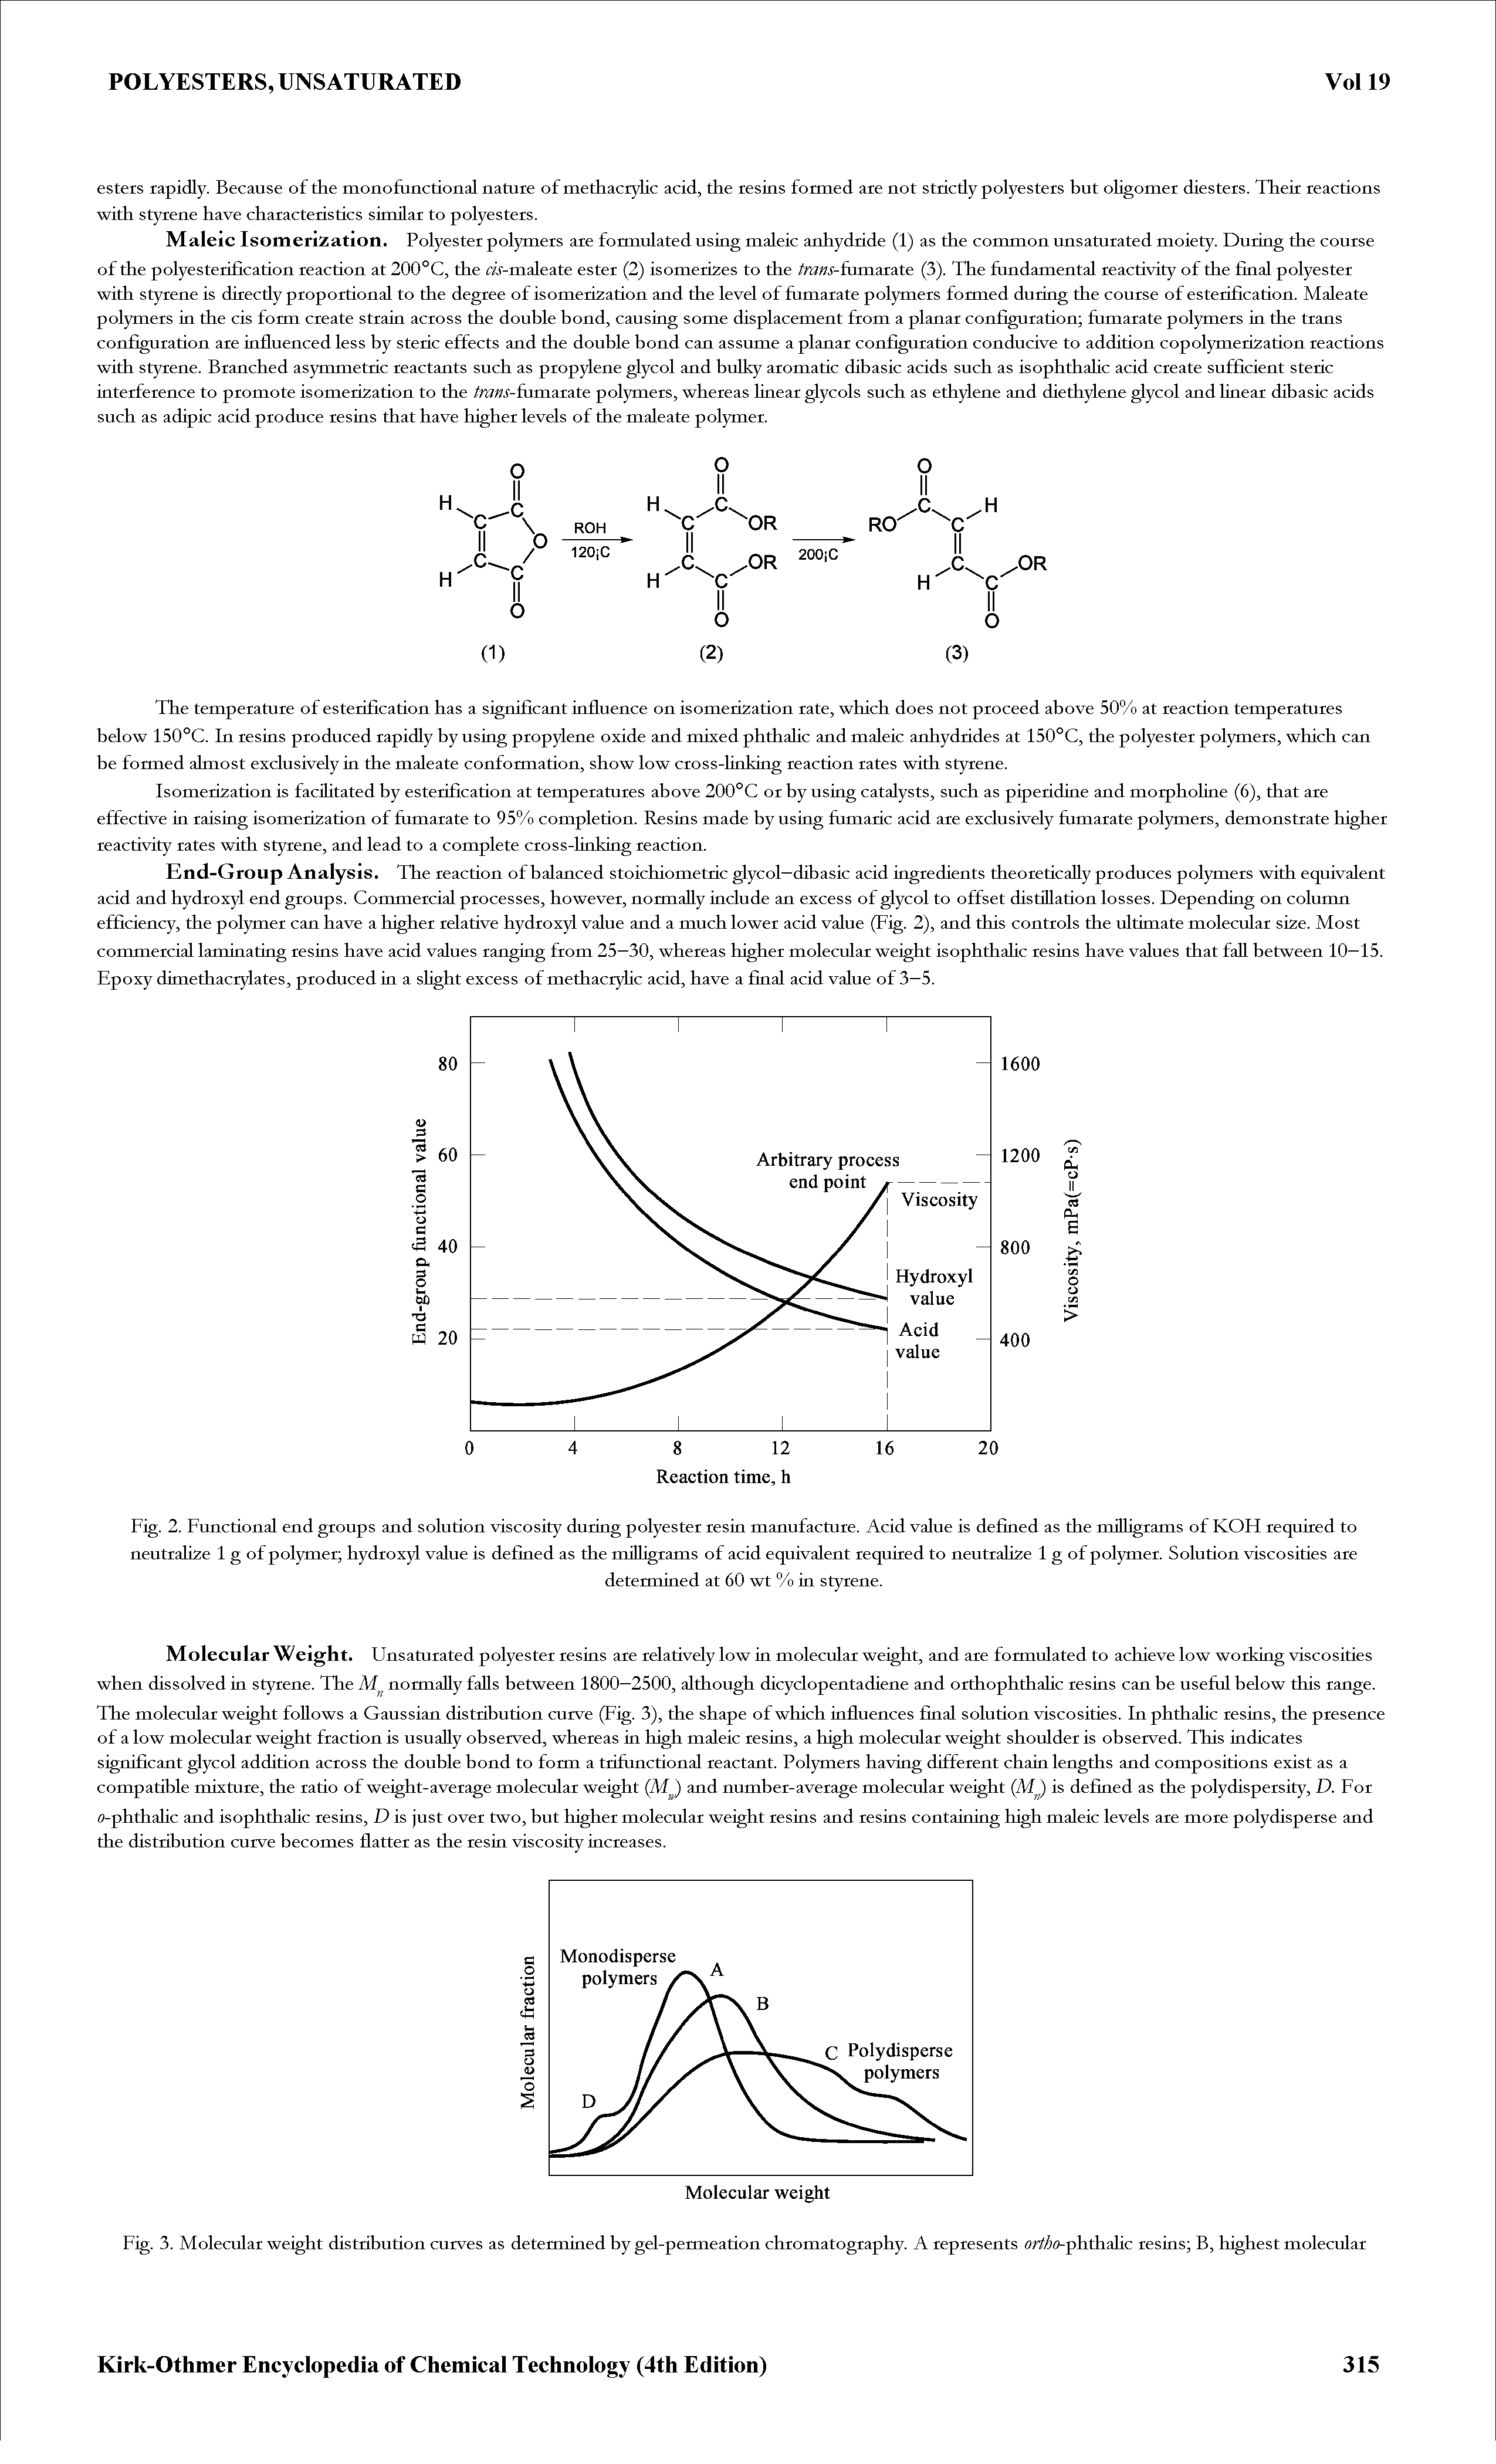 Fig. 2. Functional end groups and solution viscosity during polyester resin manufacture. Acid value is defined as the milligrams of KOH required to neutralize 1 g of polymer hydroxyl value is defined as the milligrams of acid equivalent required to neutralize 1 g of polymer. Solution viscosities are...